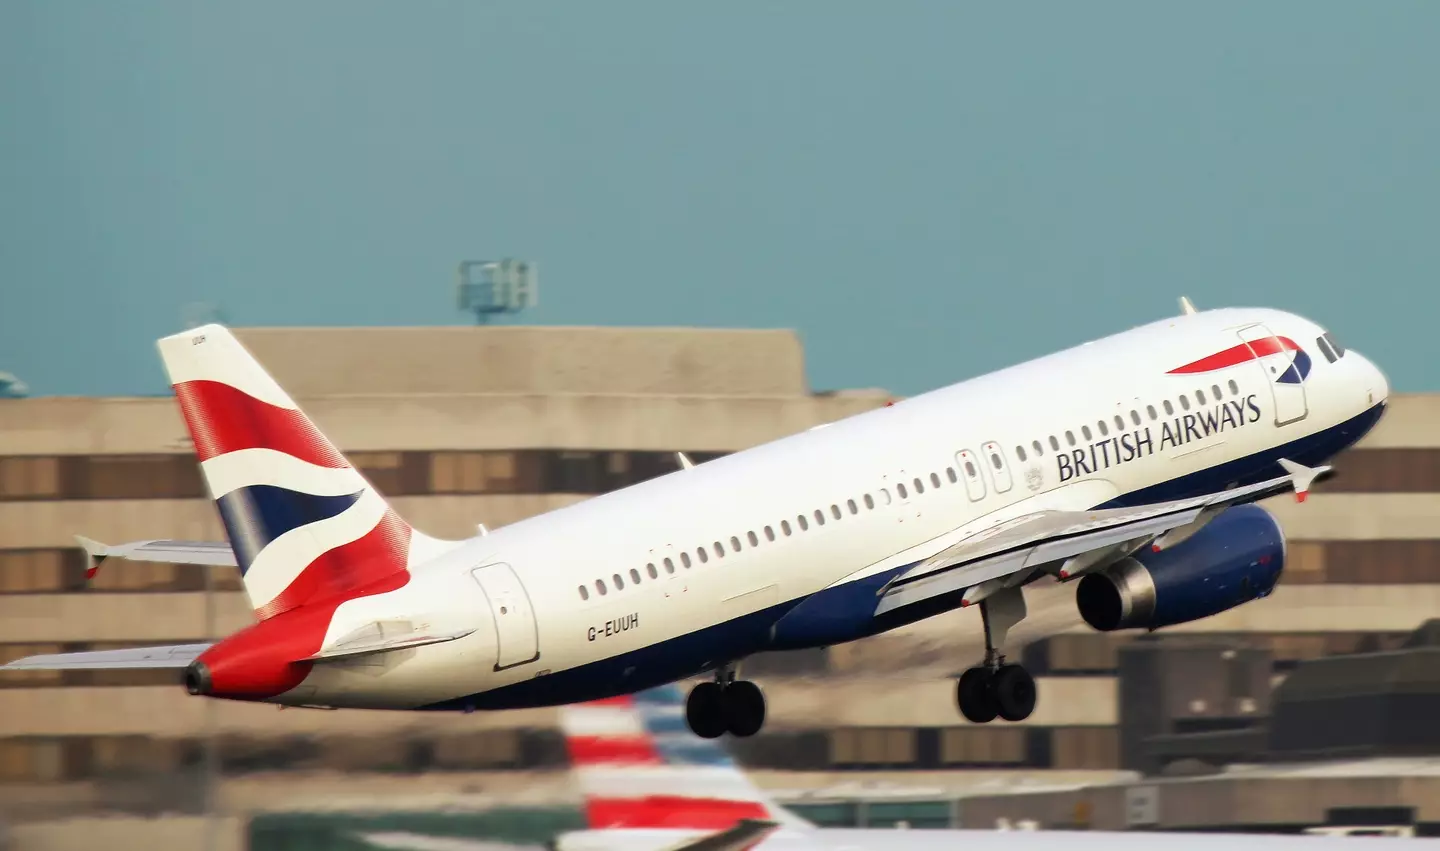 UK airlines and airports are advising customers to check before travelling.